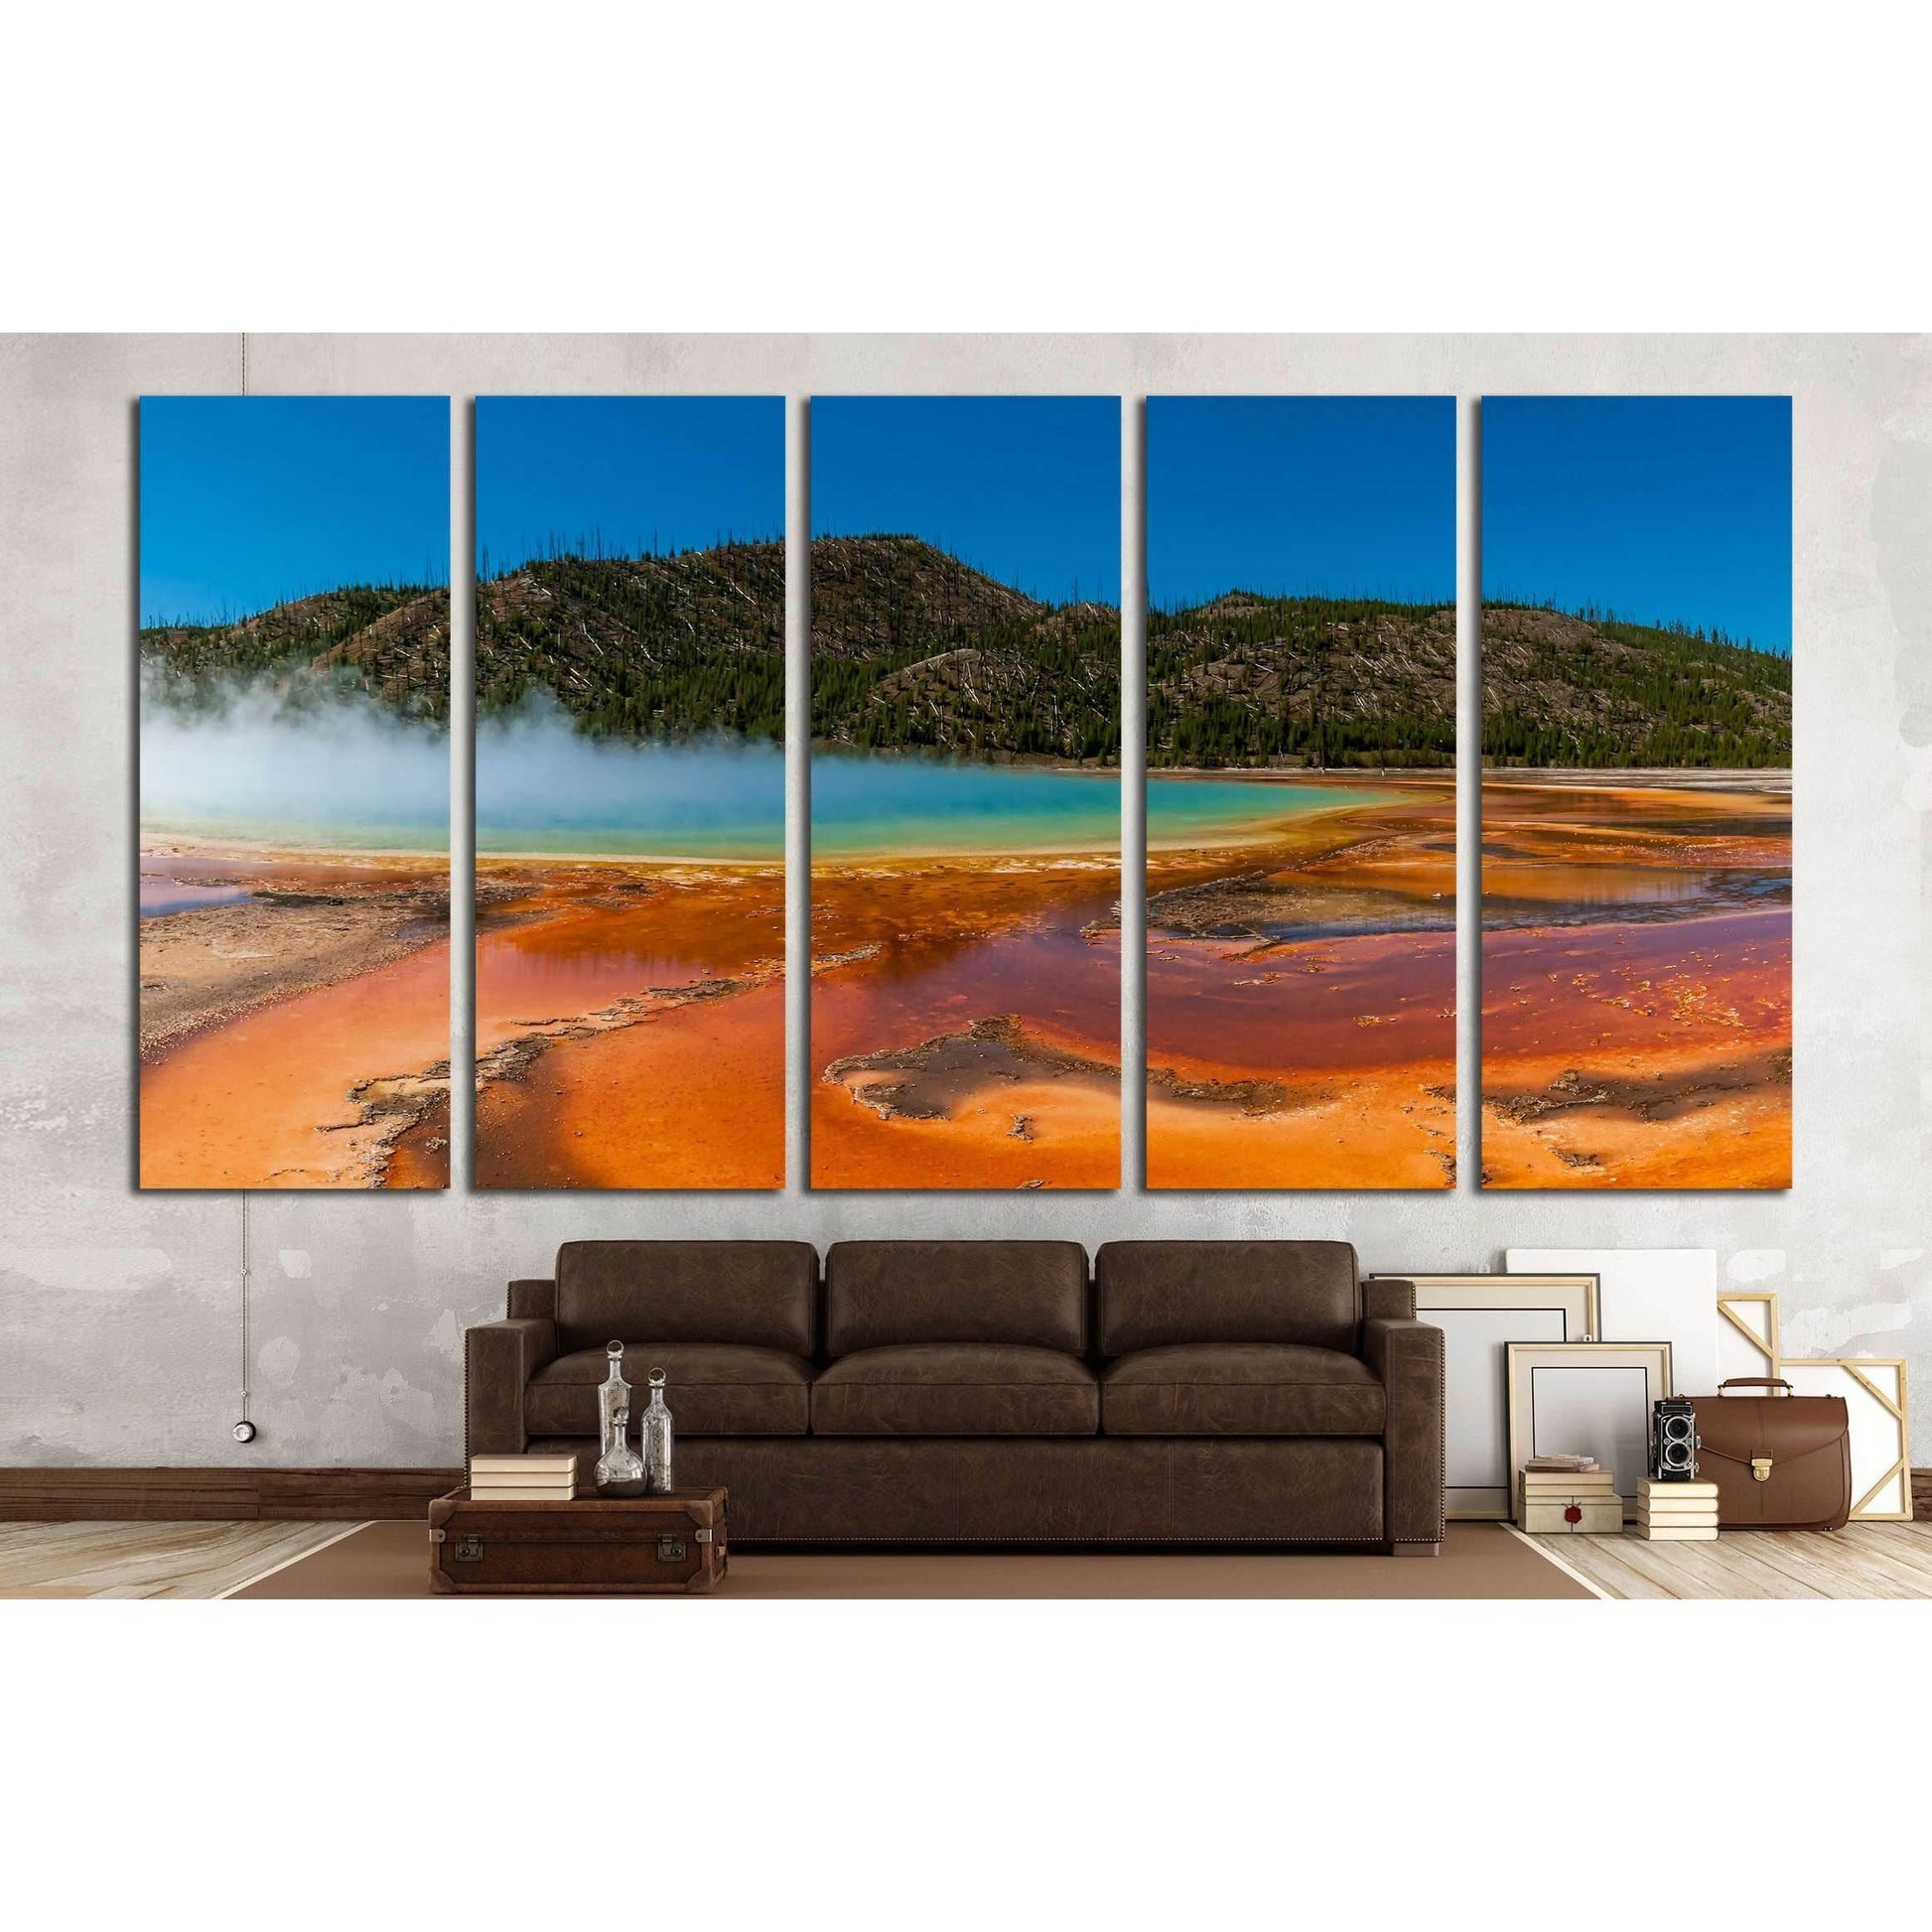 Grand Prismatic Spring Canvas Print for Nature-Inspired DecorThis canvas print features the iconic Grand Prismatic Spring in Yellowstone National Park, known for its striking color gradient and steamy, ethereal quality. The vivid oranges and blues against